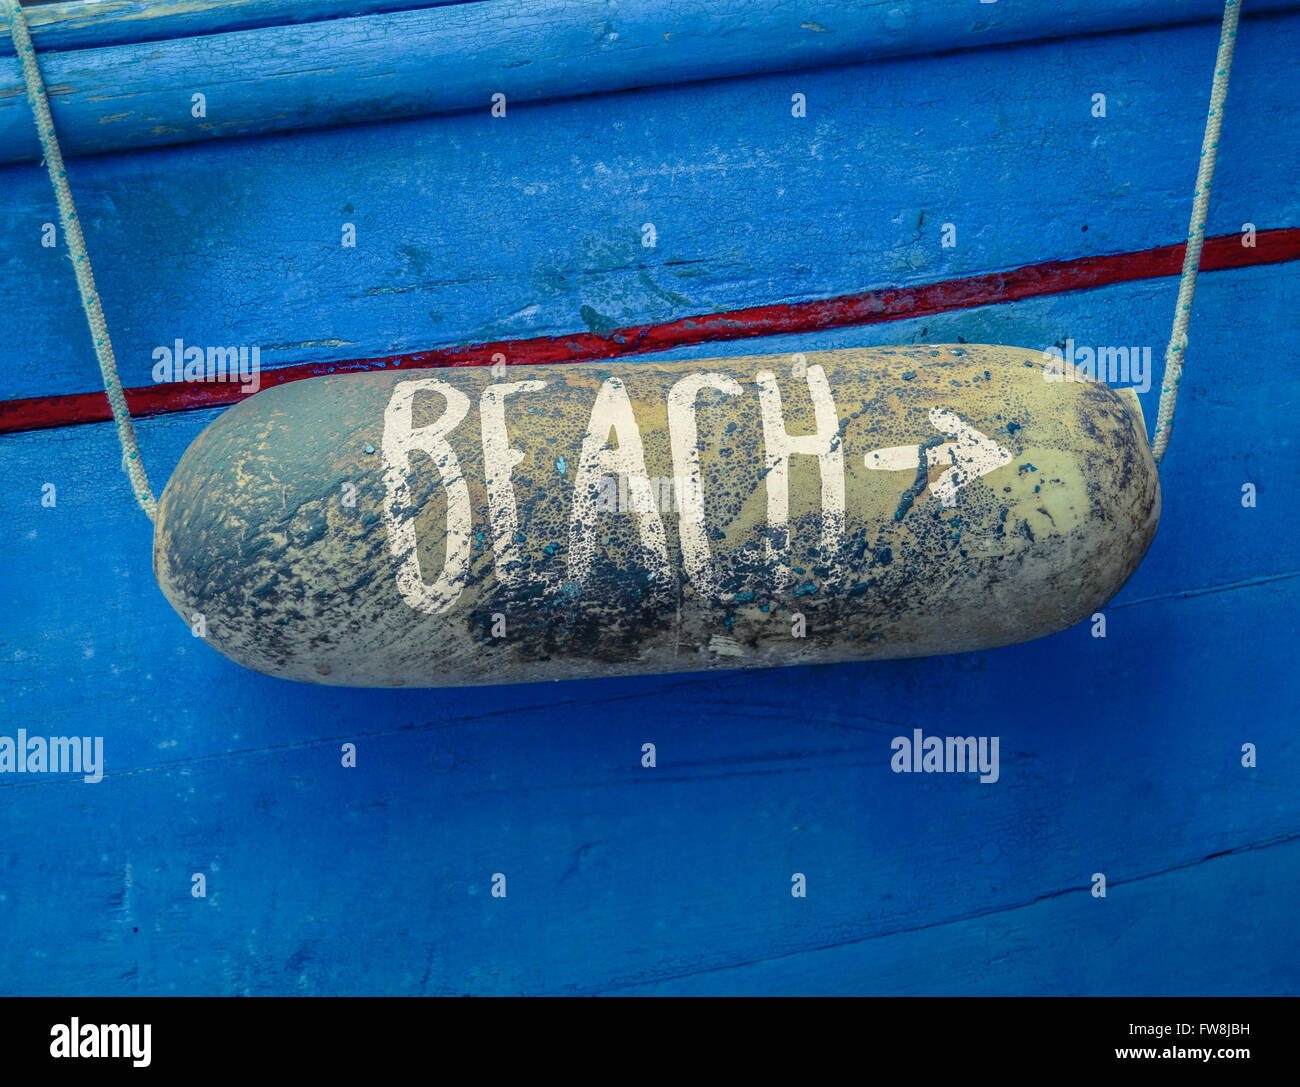 Rustic Sign For A Beach On A Buoy On Of An Old Blue Boat Stock Photo